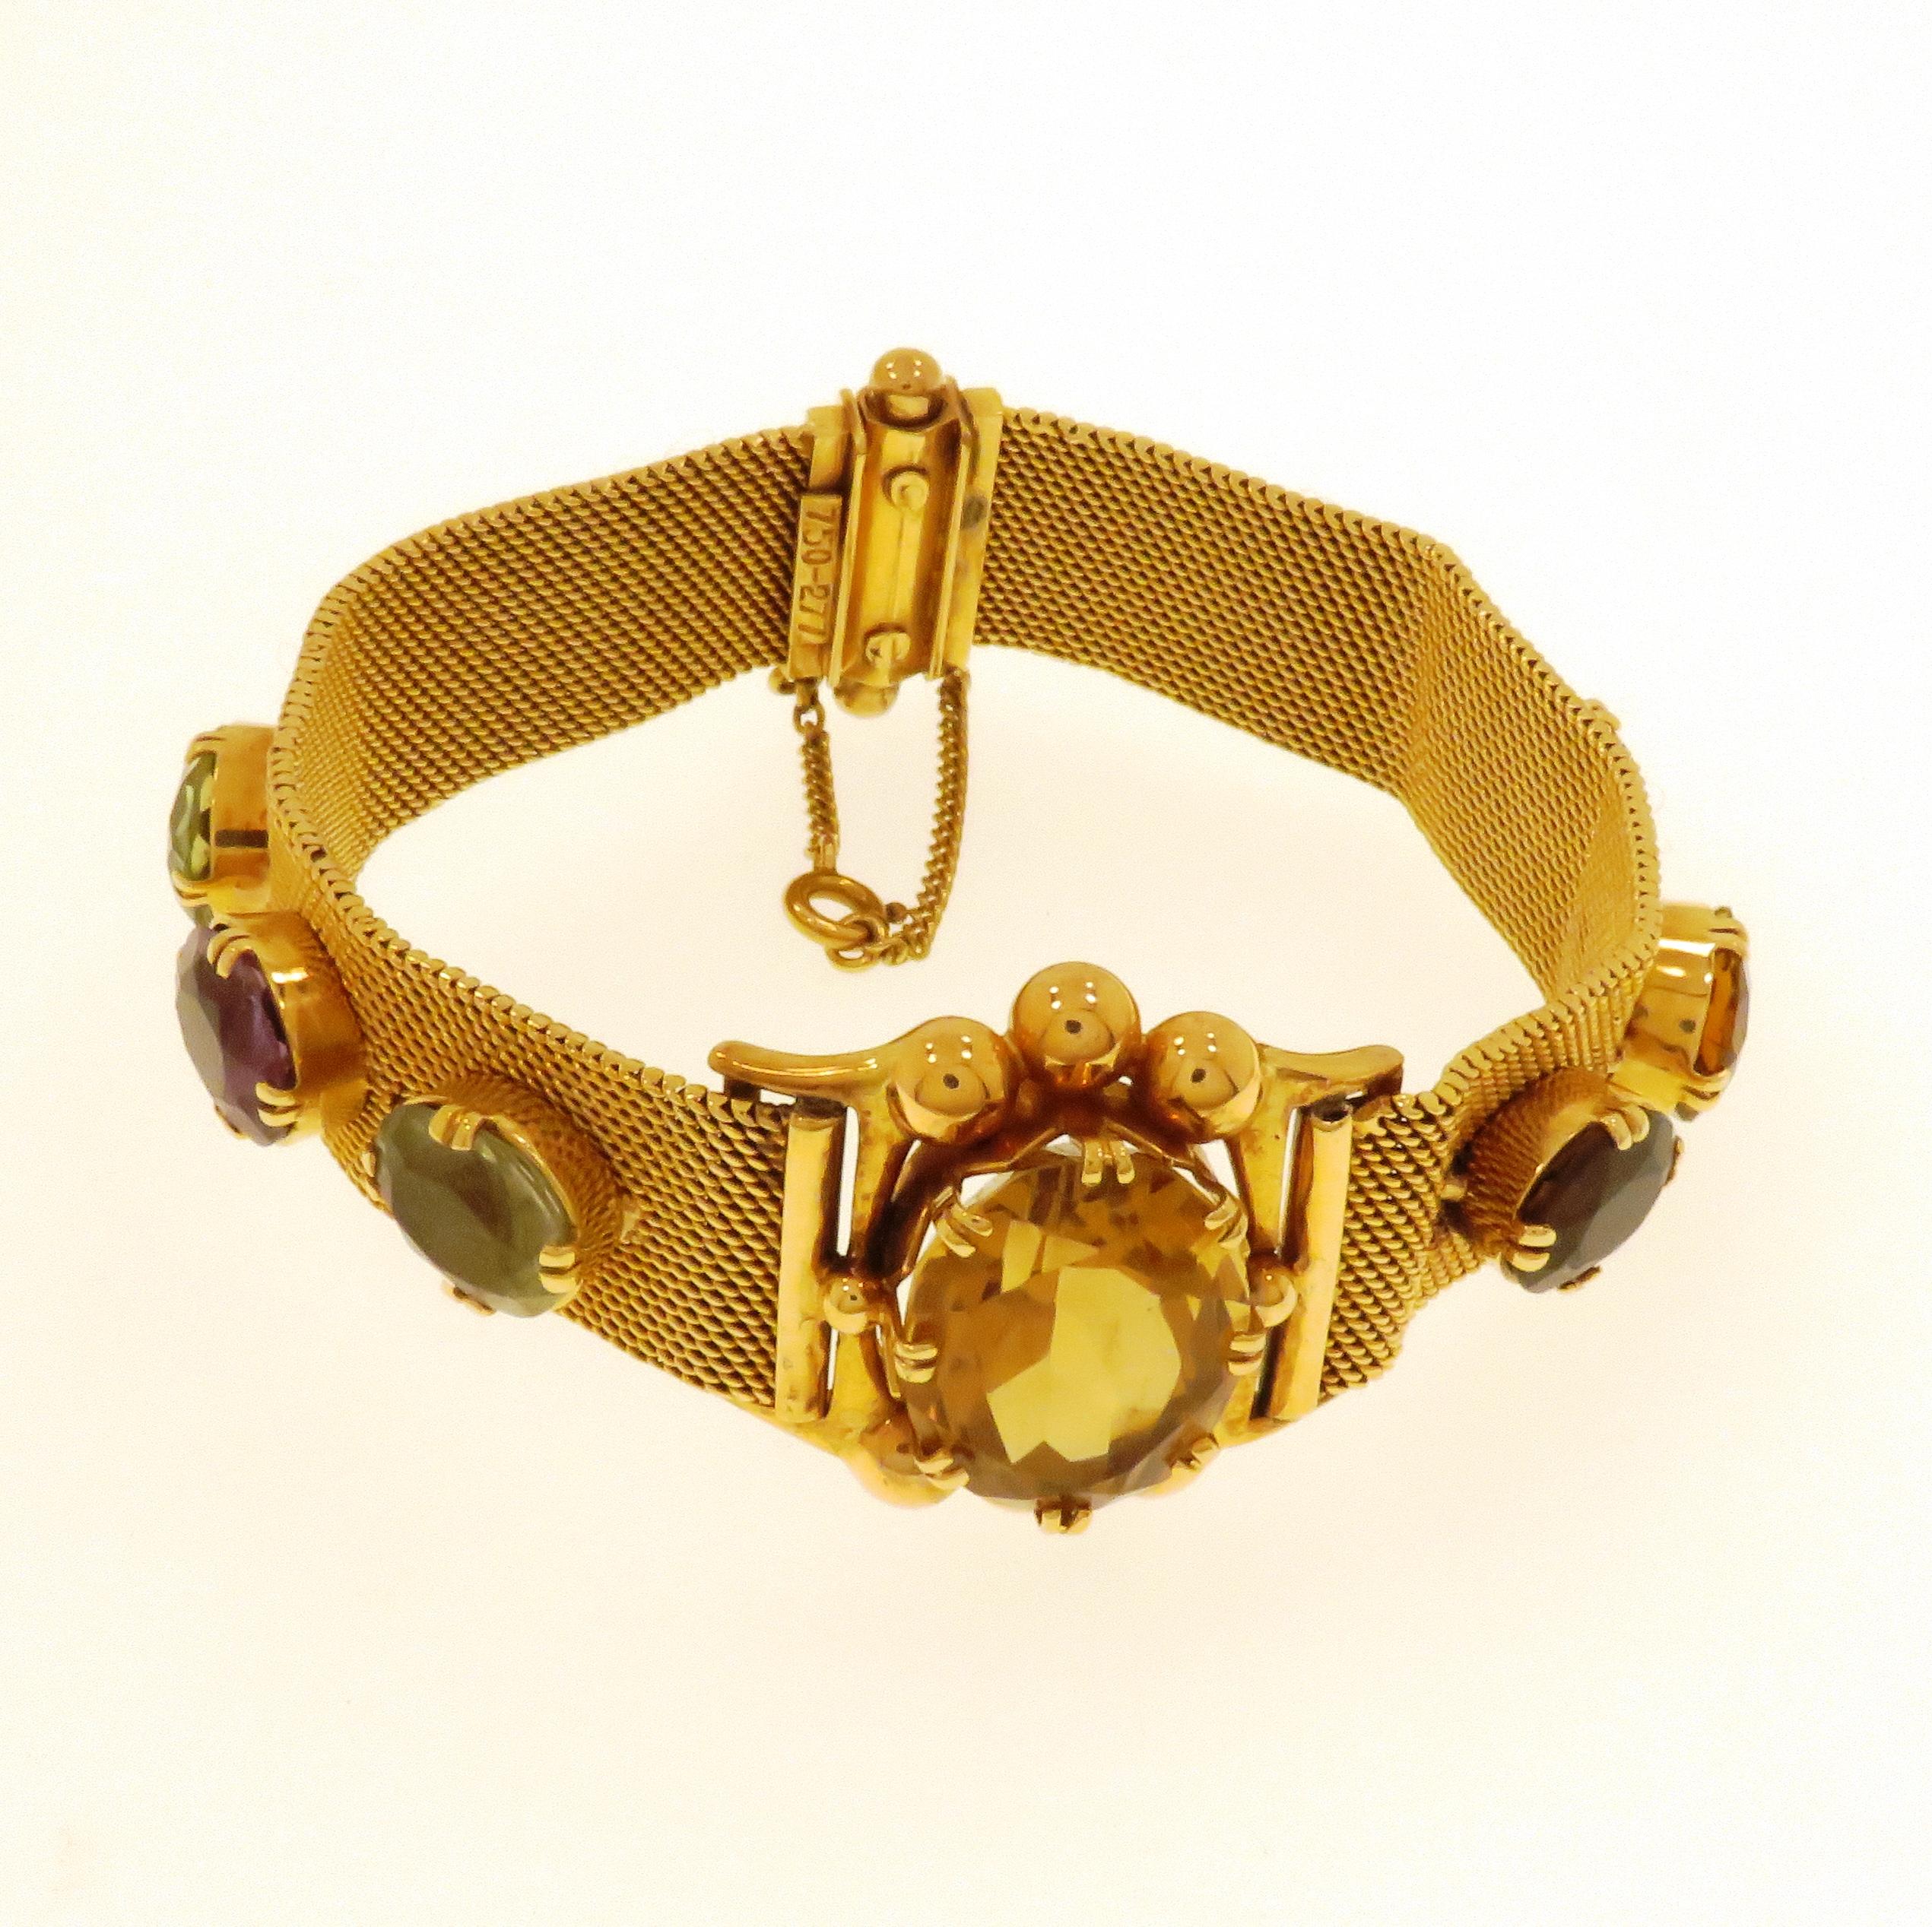 Striking vintage bracelet dating back to the 1960s. Crafted in Italy in 18k rose gold made by a band of a gold mesh embellished in the centre by a remarkable yellow topaz and decorated on each side by natural gemstones: two green tourmalines and a